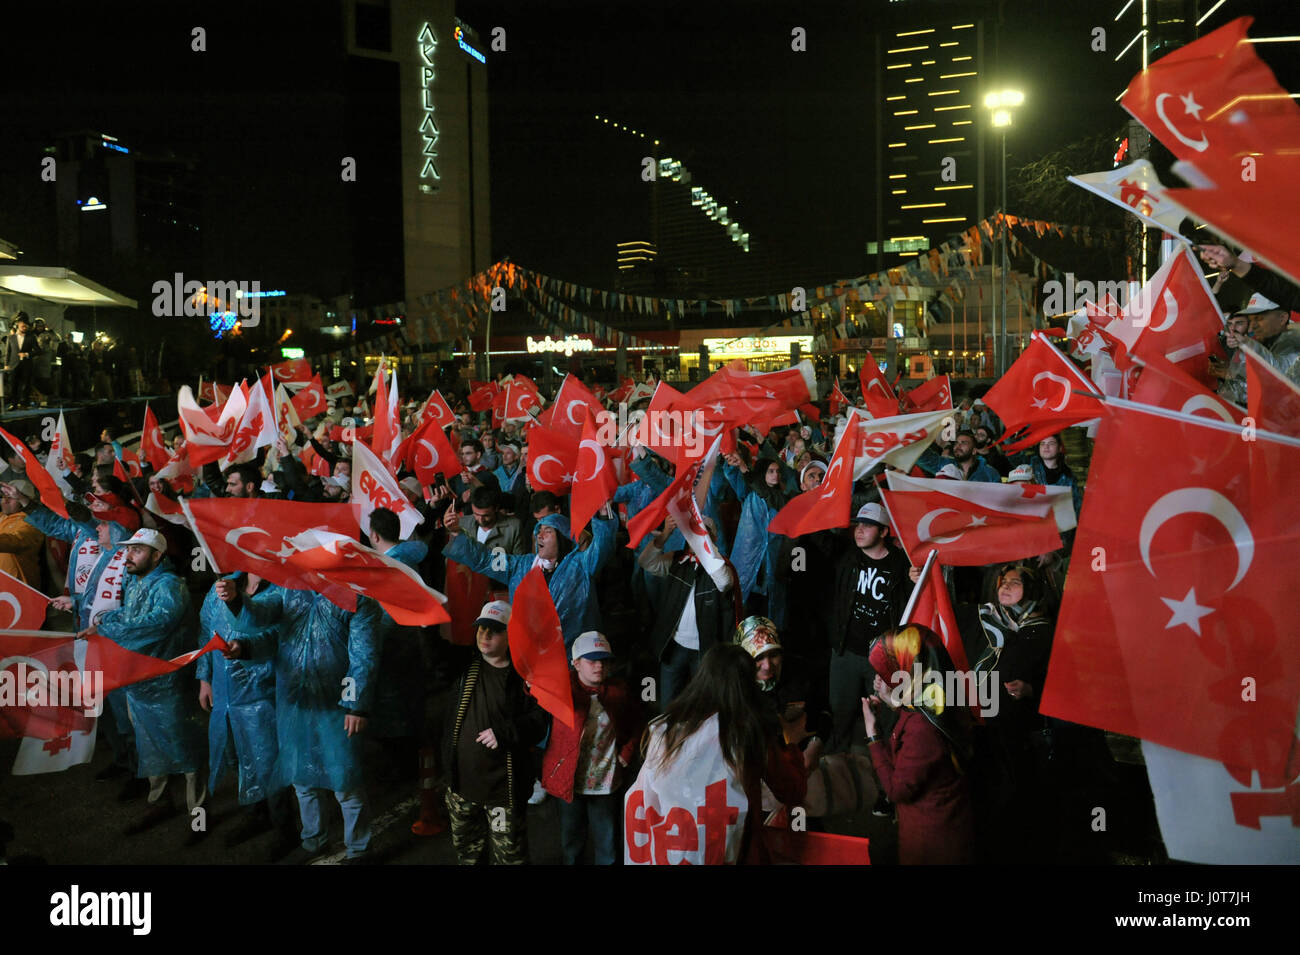 Ankara, Turkey. 16th Apr, 2017. Turkish citizens celebrate the victory of referendum in Ankara, capital of Turkey, on April 16, 2017. Turkish President Recep Tayyip Erdogan declared on Sunday night that the proposed constitutional changes were accepted in a referendum, paying the way for the country to introduce the presidential system. Credit: Mustafa Kaya/Xinhua/Alamy Live News Stock Photo